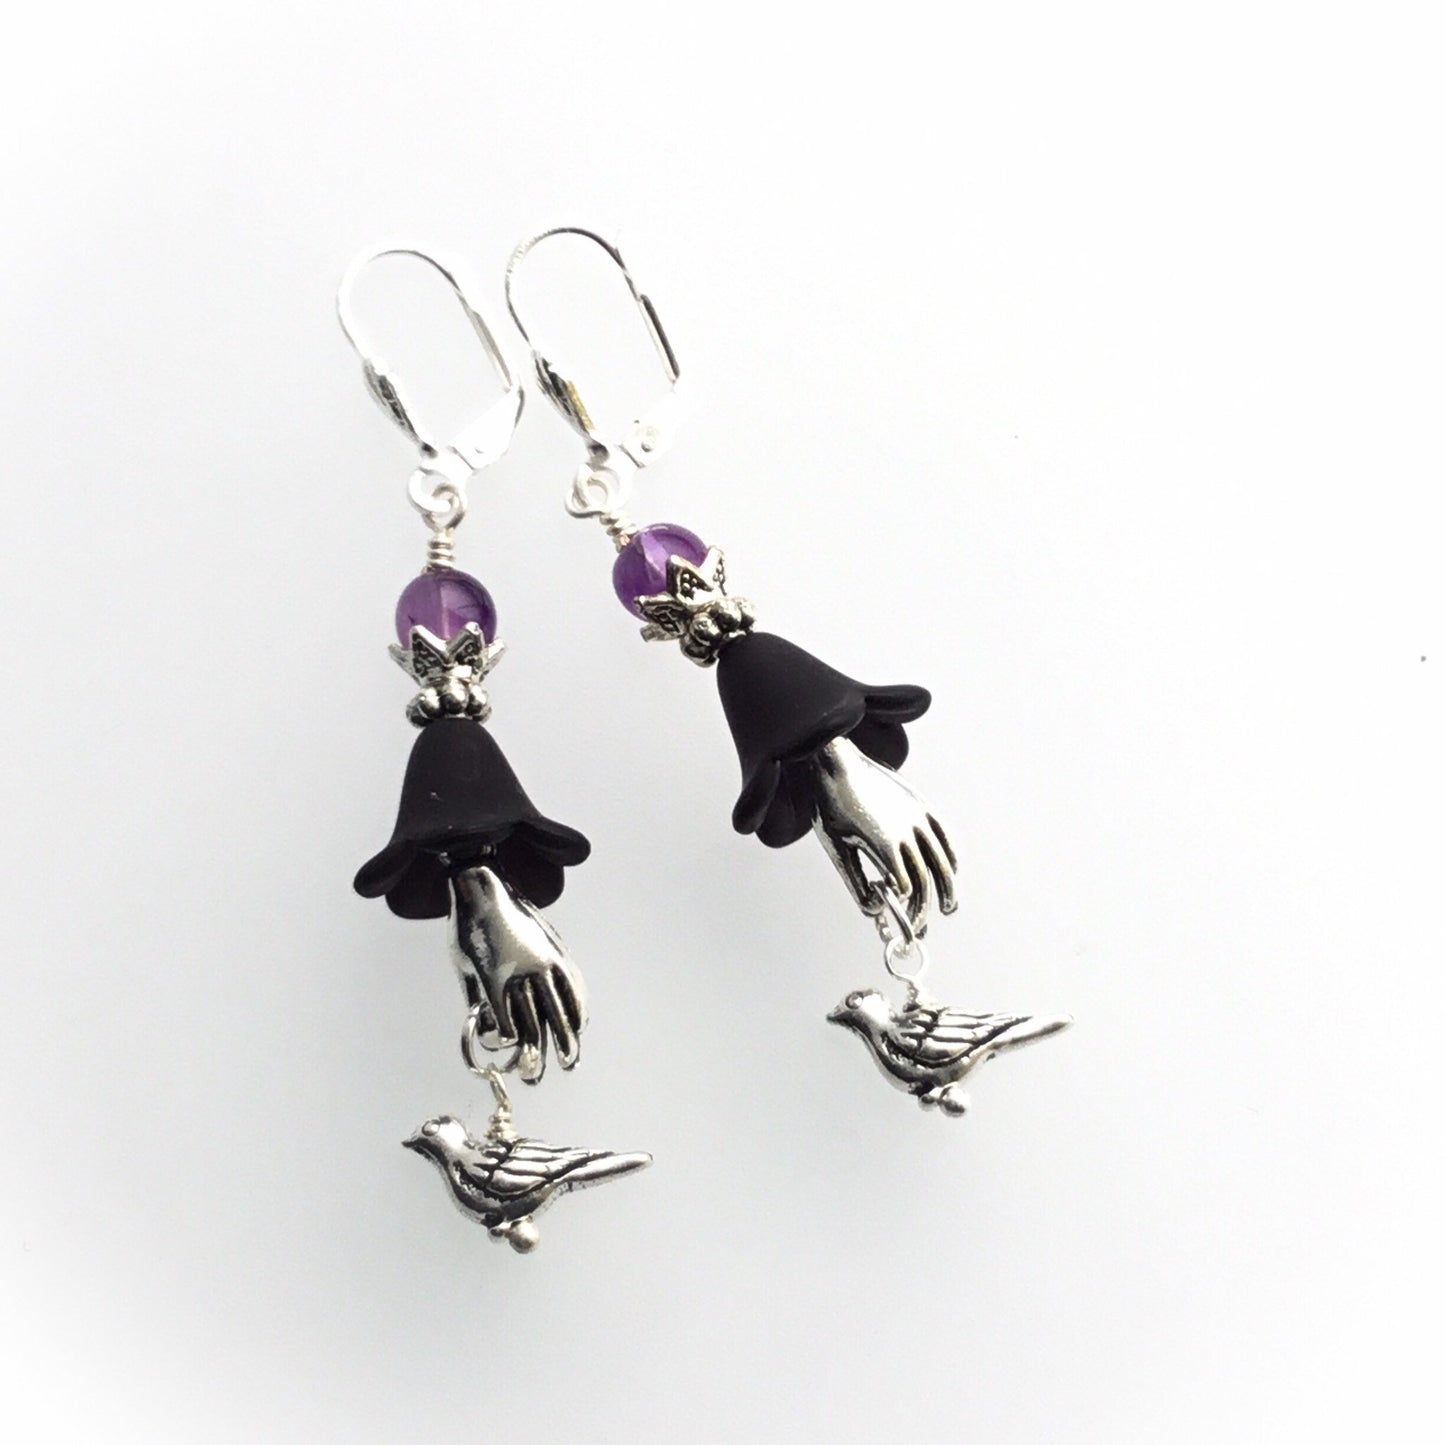 Paloma Bird In The Hand Earrings. Amethyst Beads. Silver Pewter. 925 & Titanium Ear-wire Options - Darkmoon Fayre